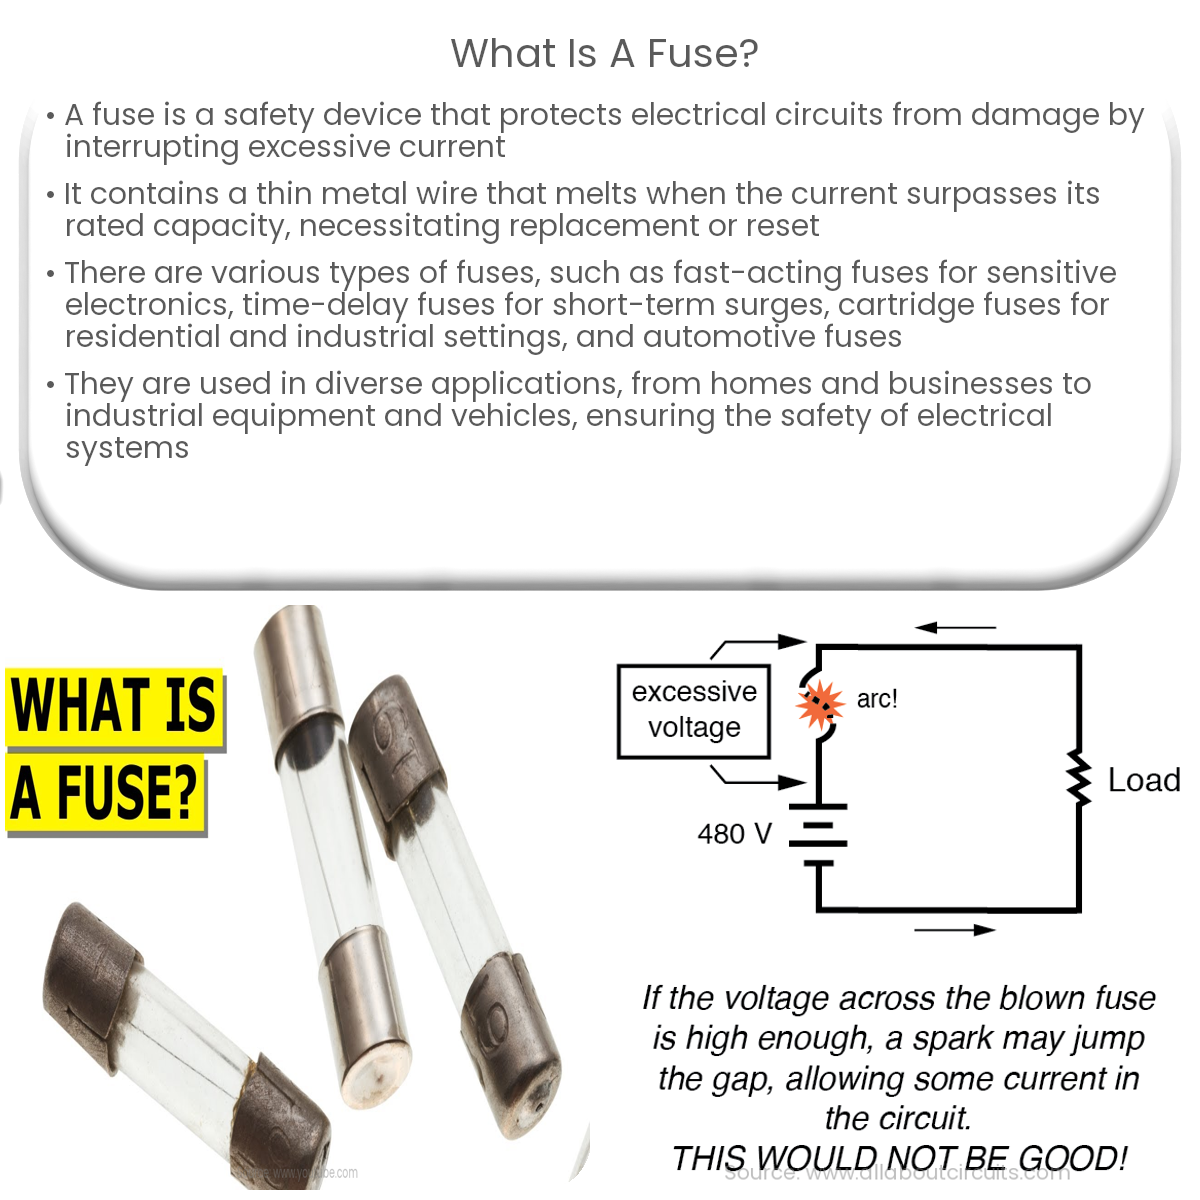 What is a fuse?